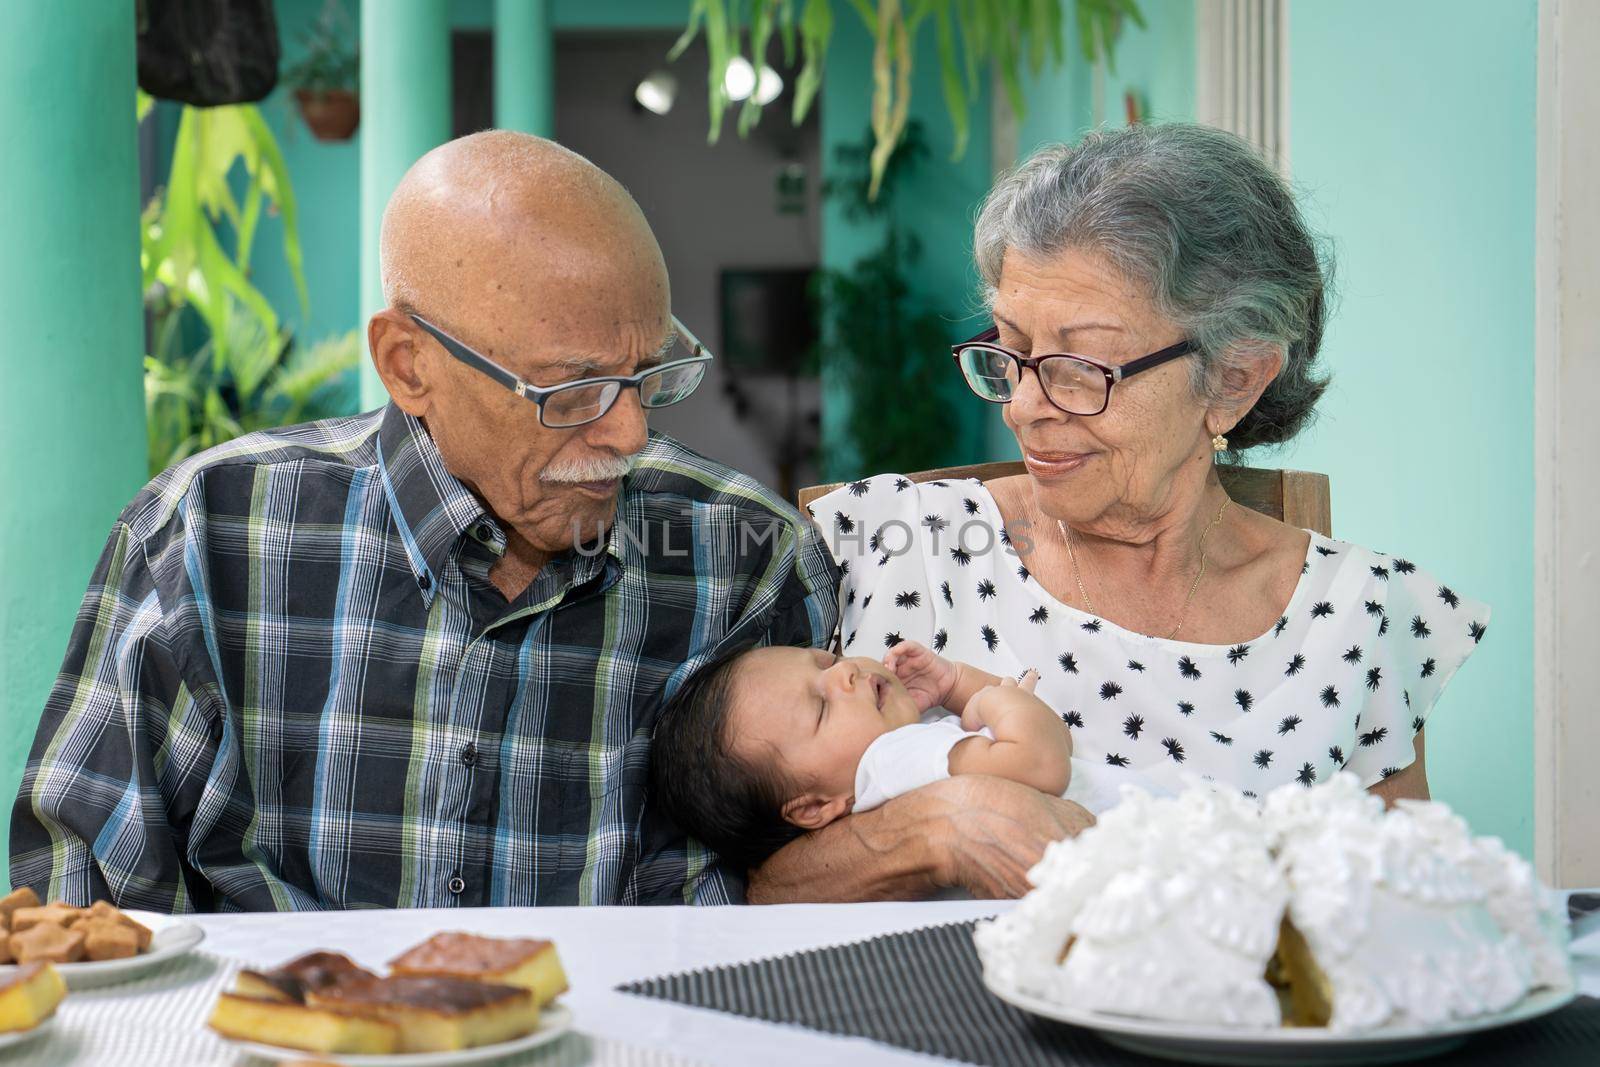 Elderly couple sitting at a table with an infant in the woman's arms